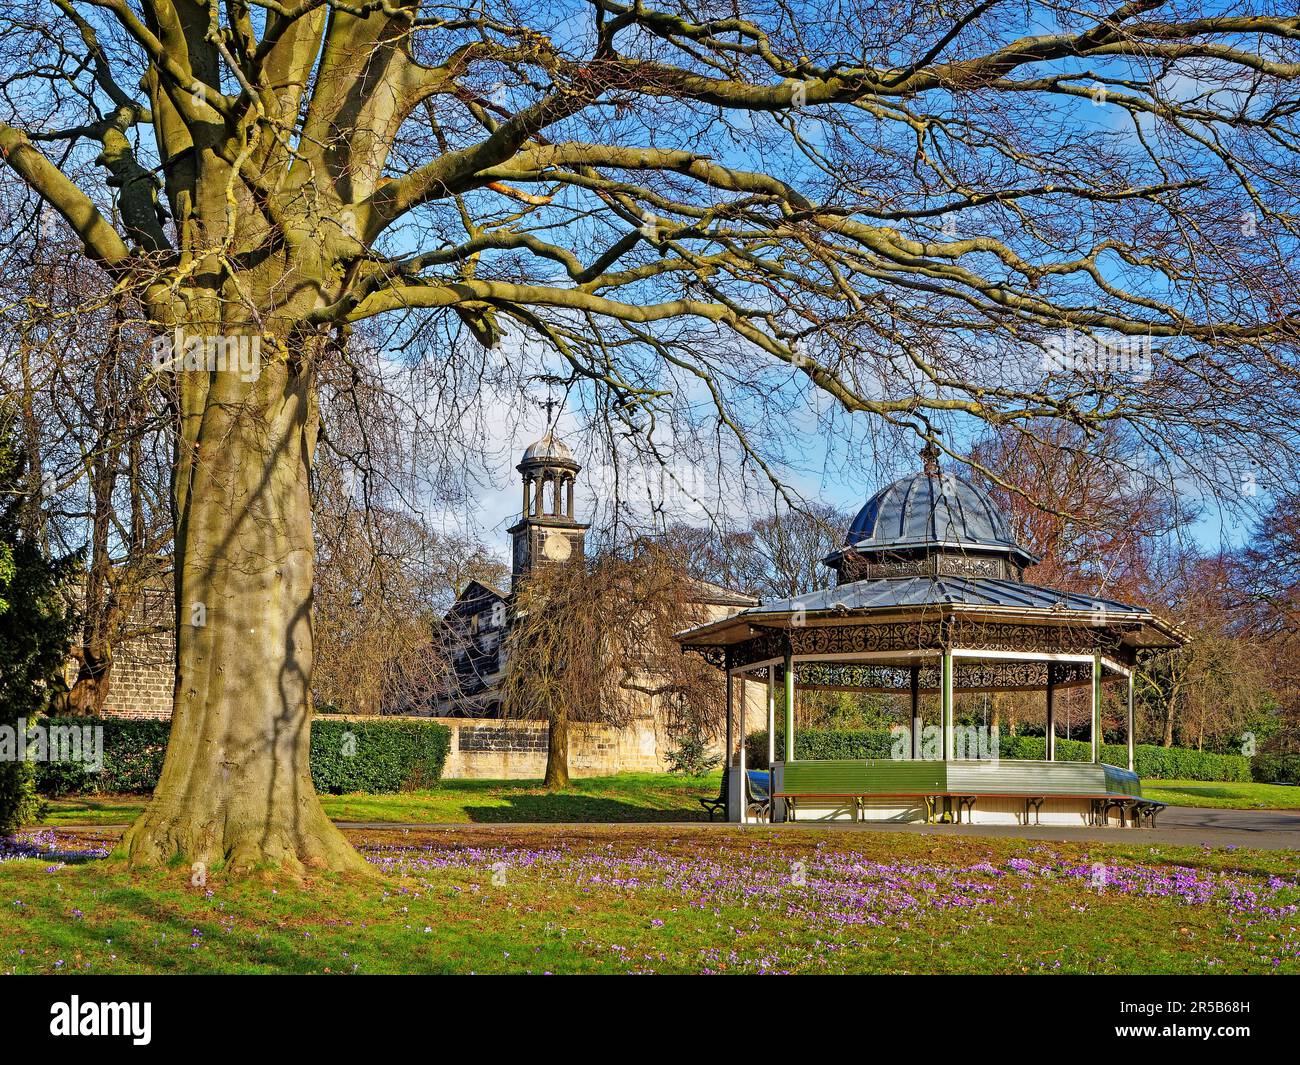 UK, West Yorkshire, Leeds, Roundhay Park, Bandstand and Coach House. Stock Photo